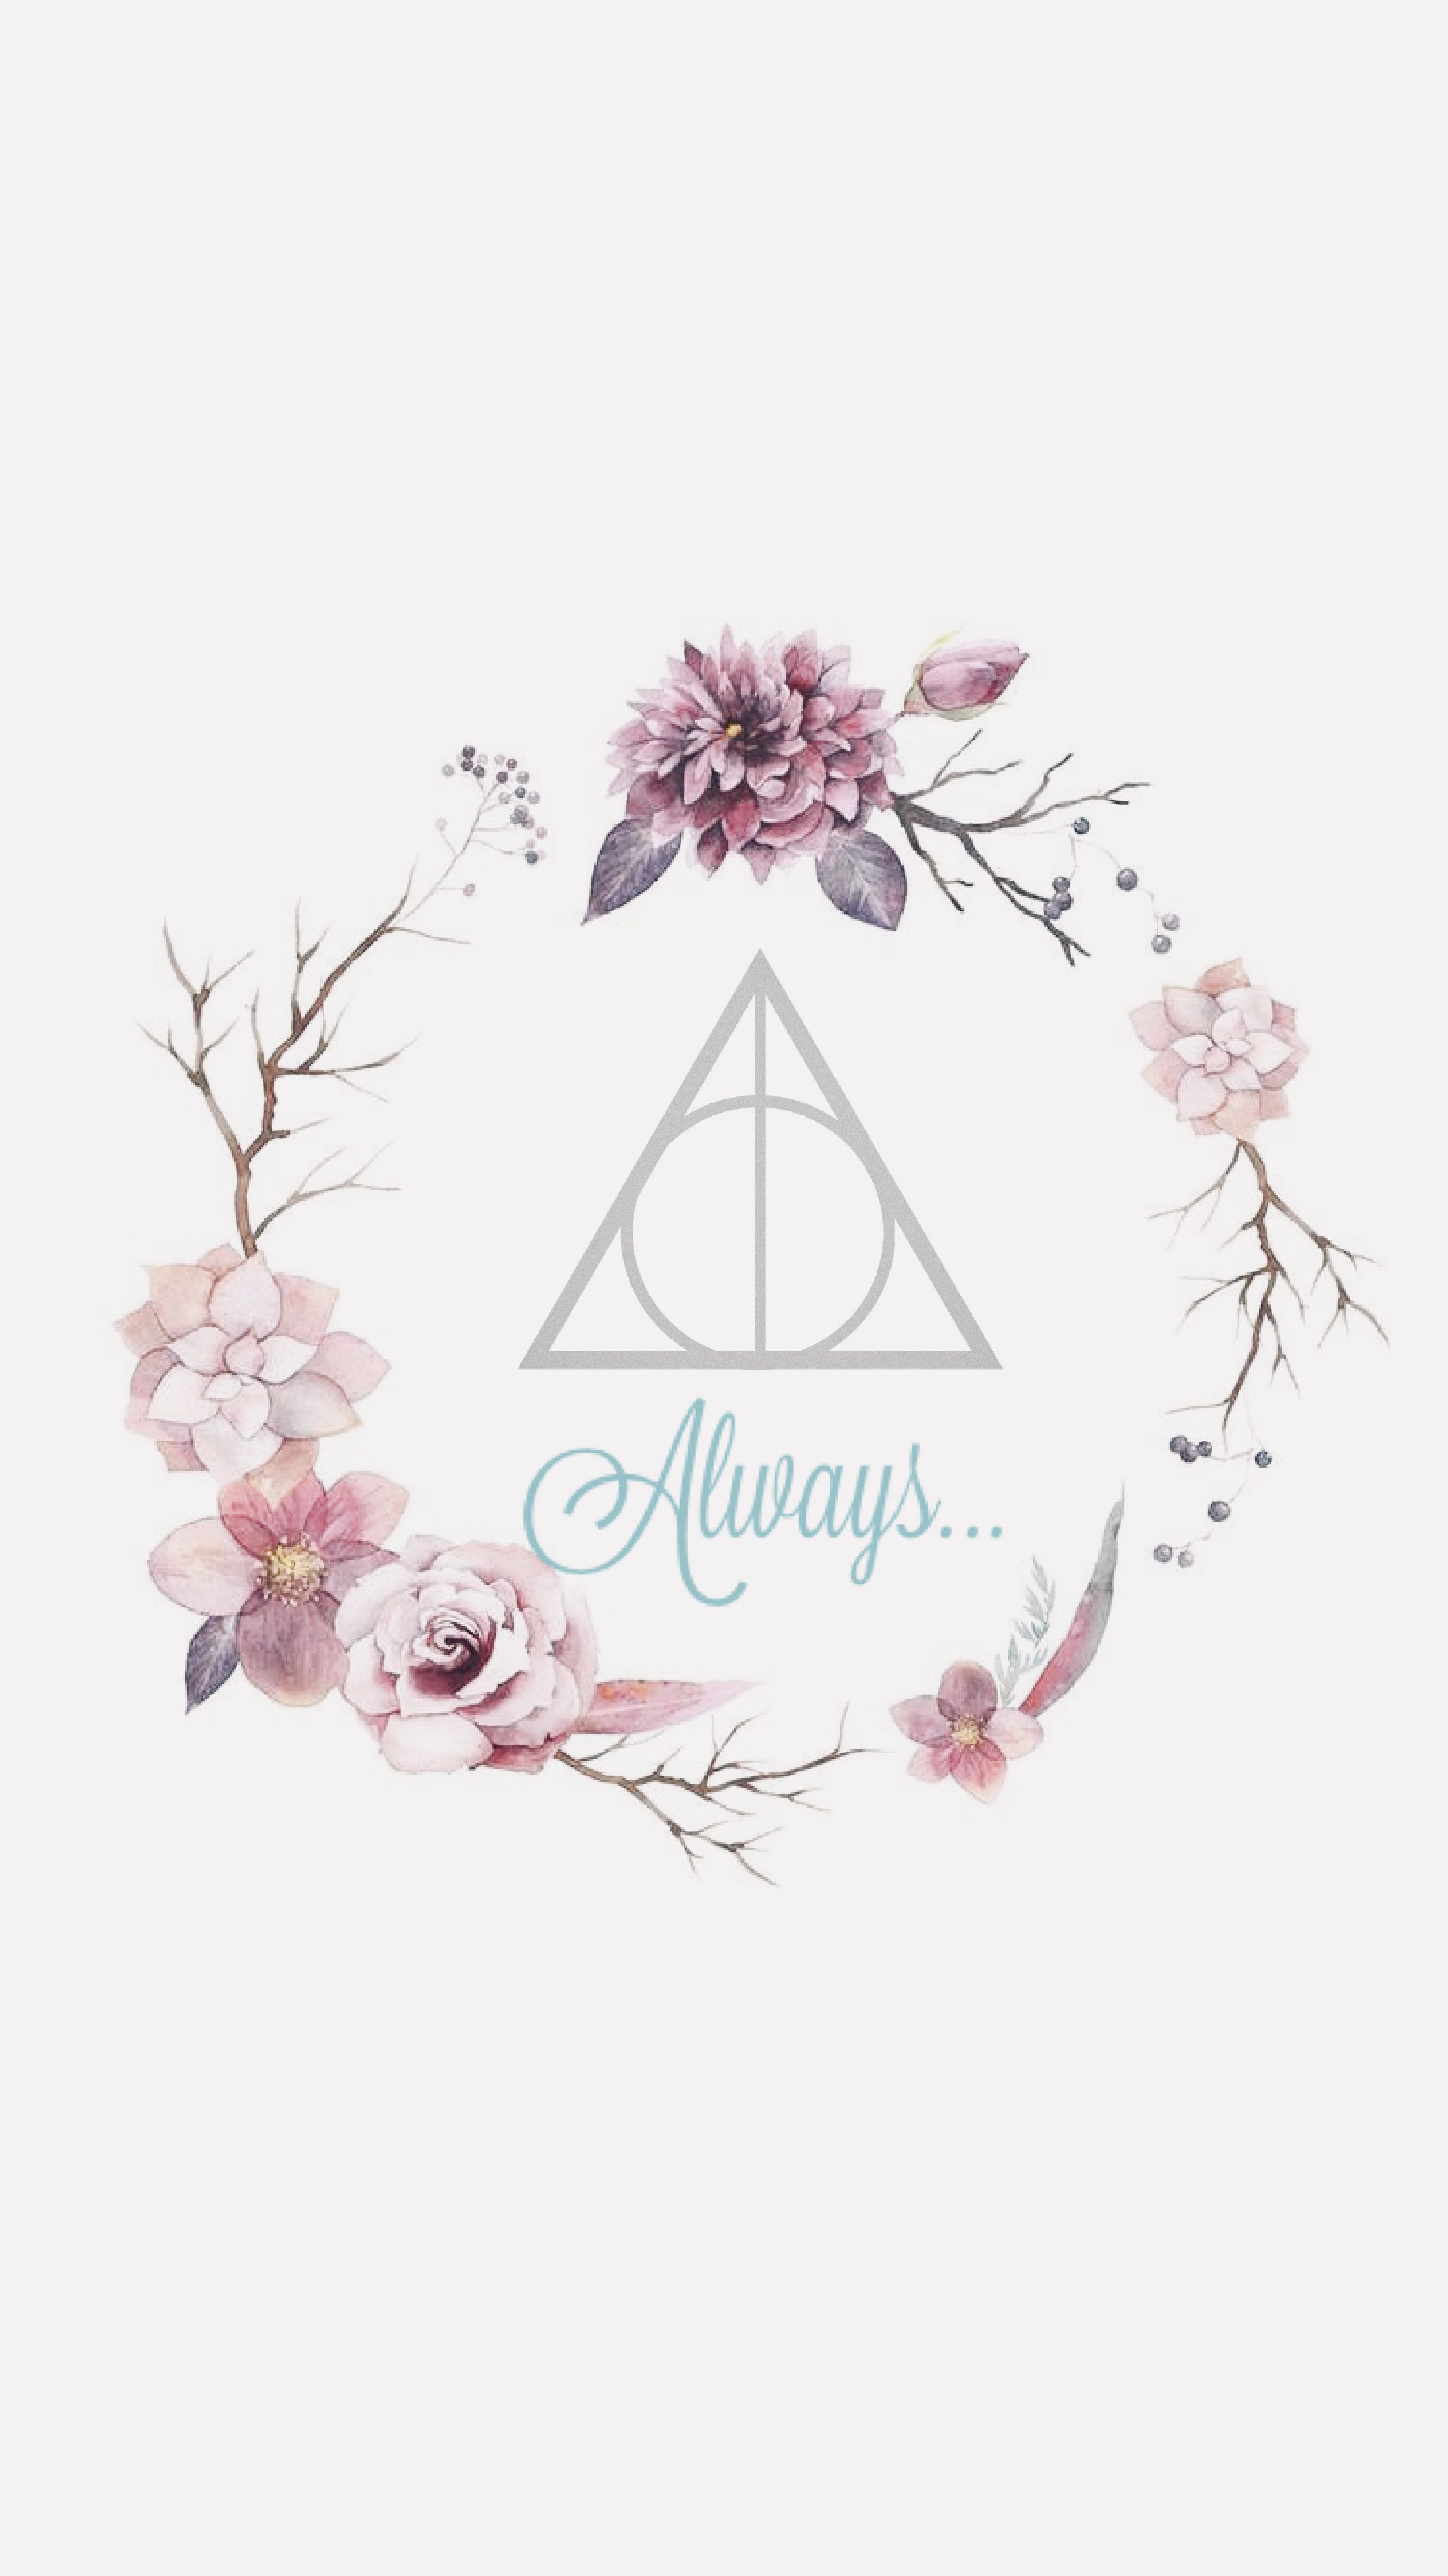 Wallpaper Harry Potter Always Pink girly cute flowers dealthy hallows. Harry potter phone, Harry potter background, Harry potter wallpaper phone